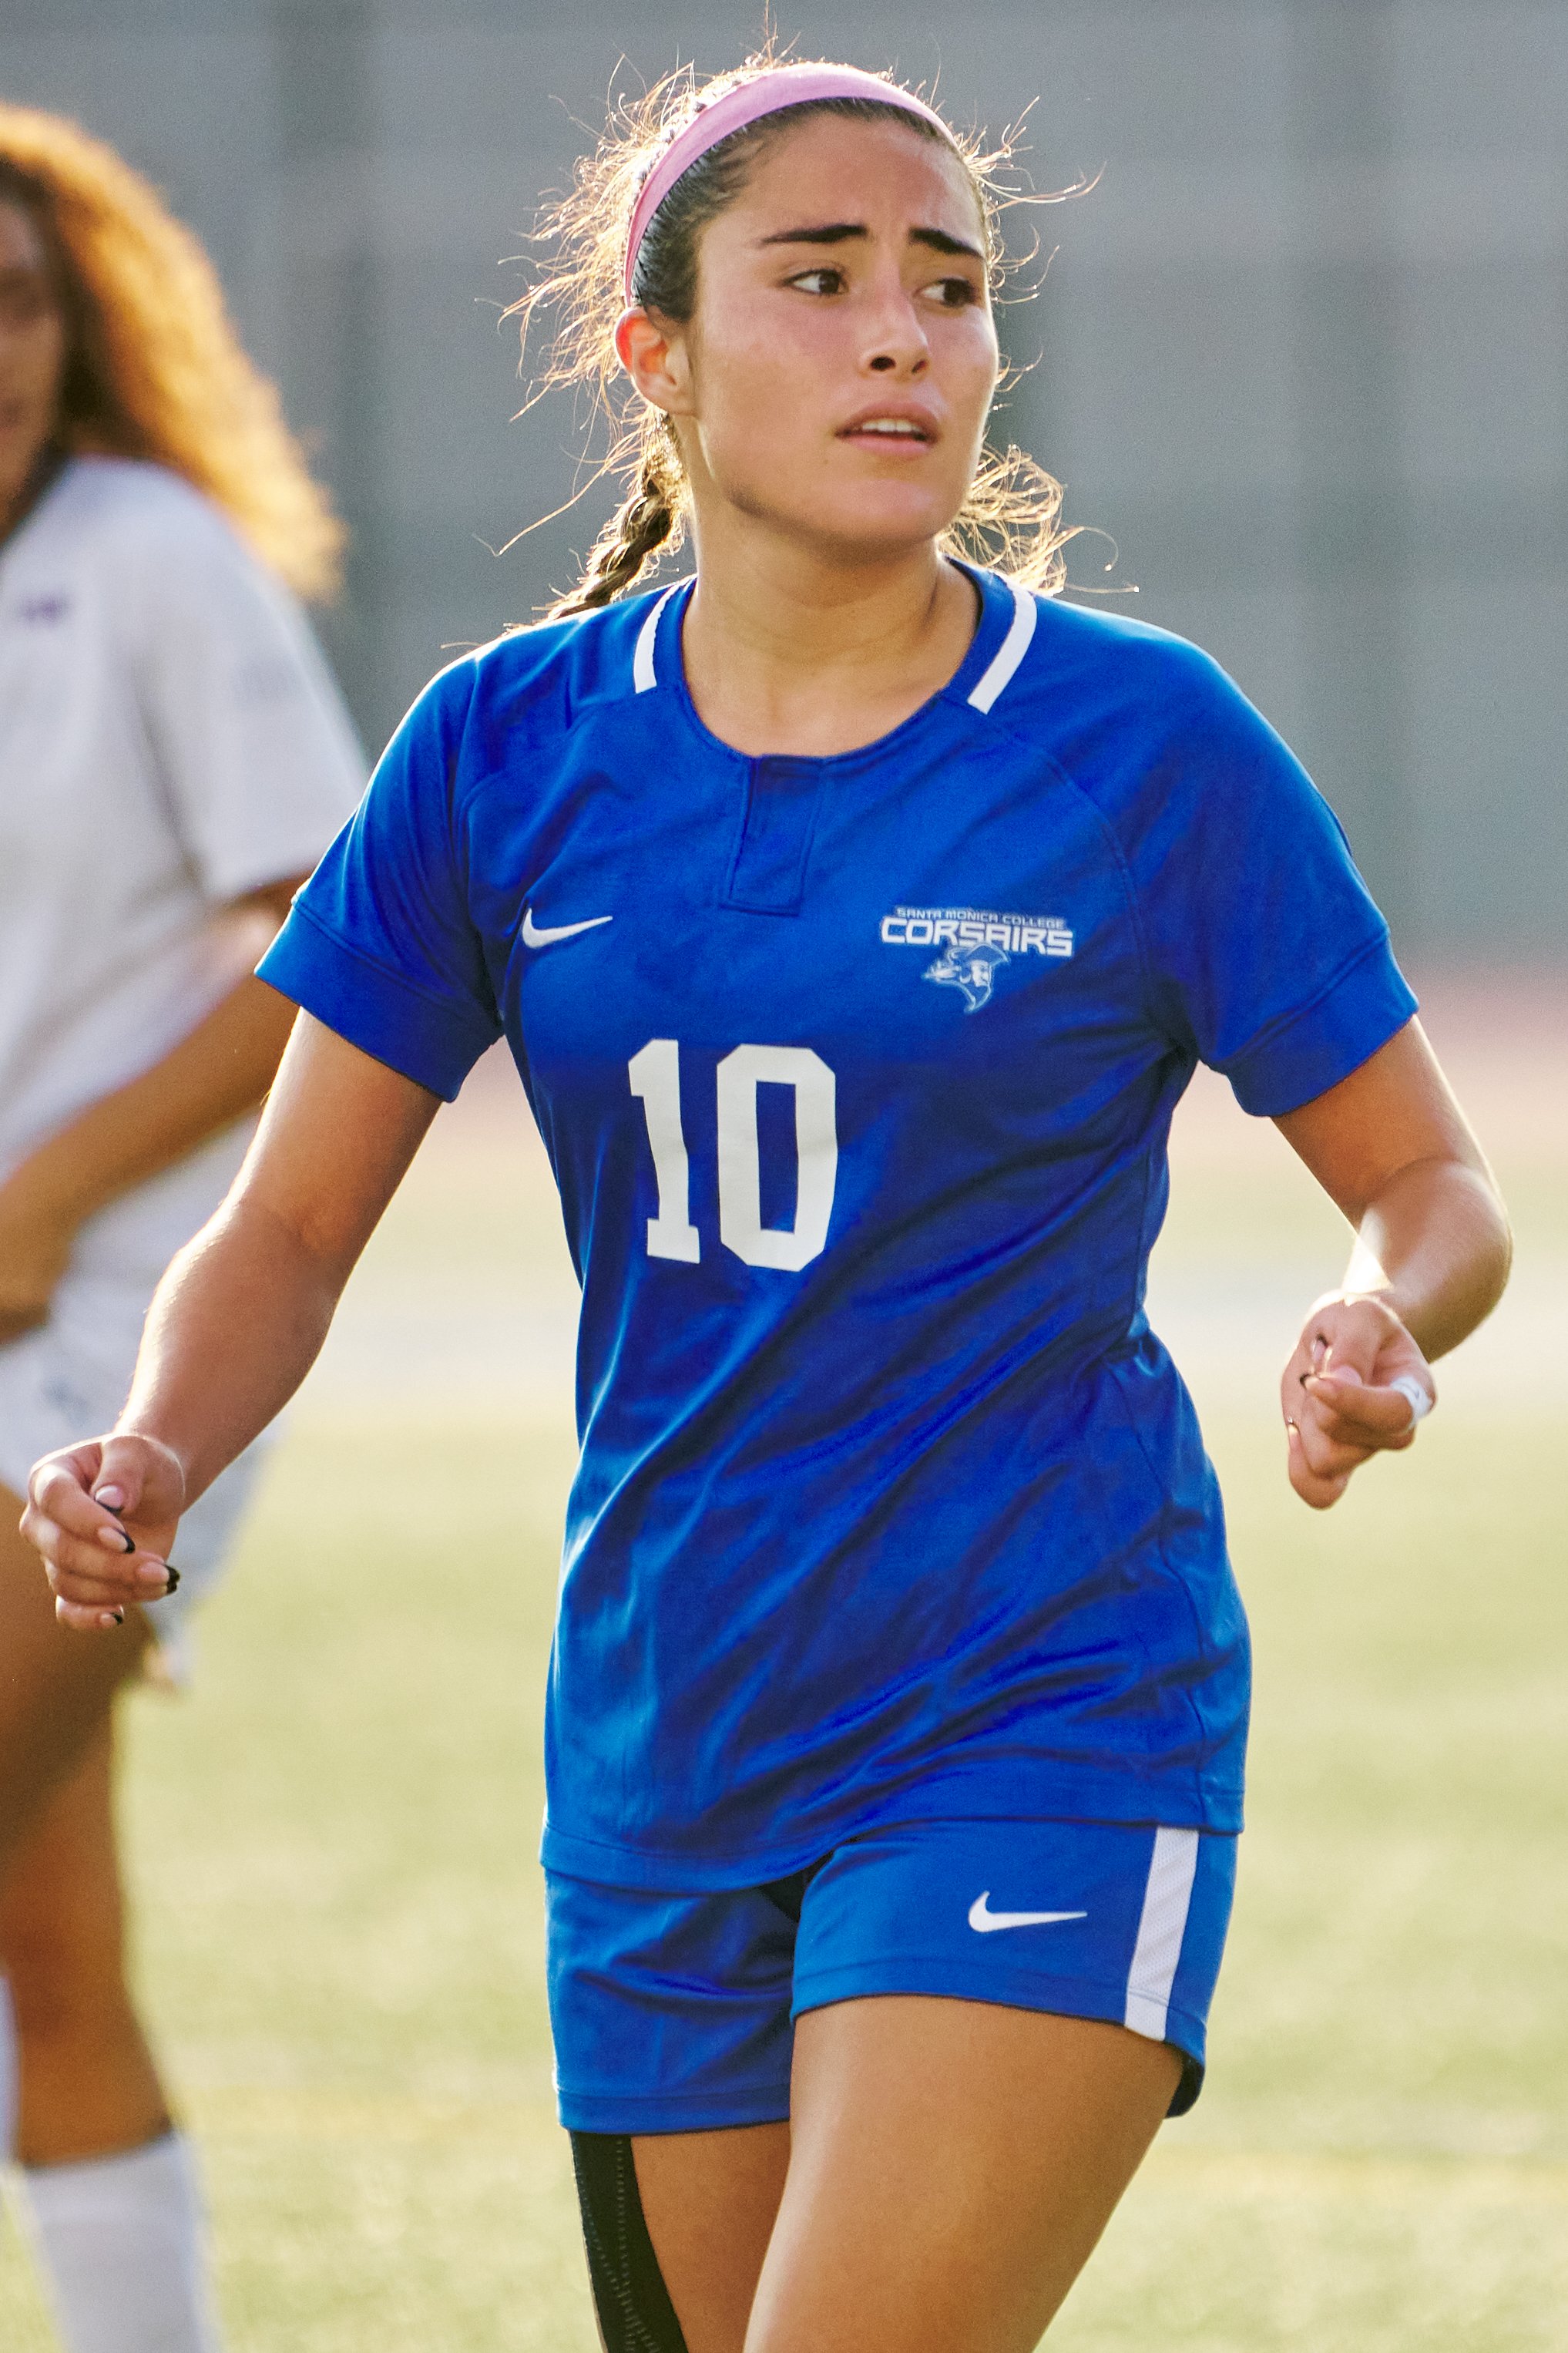  Santa Monica College Corsairs' Ali Alban during the second half of the women's soccer match against the Antelope Valley College Marauders on Tuesday, Oct. 11, 2022, at Corsair Field in Santa Monica, Calif. The Corsairs lost 6-0. (Nicholas McCall | T